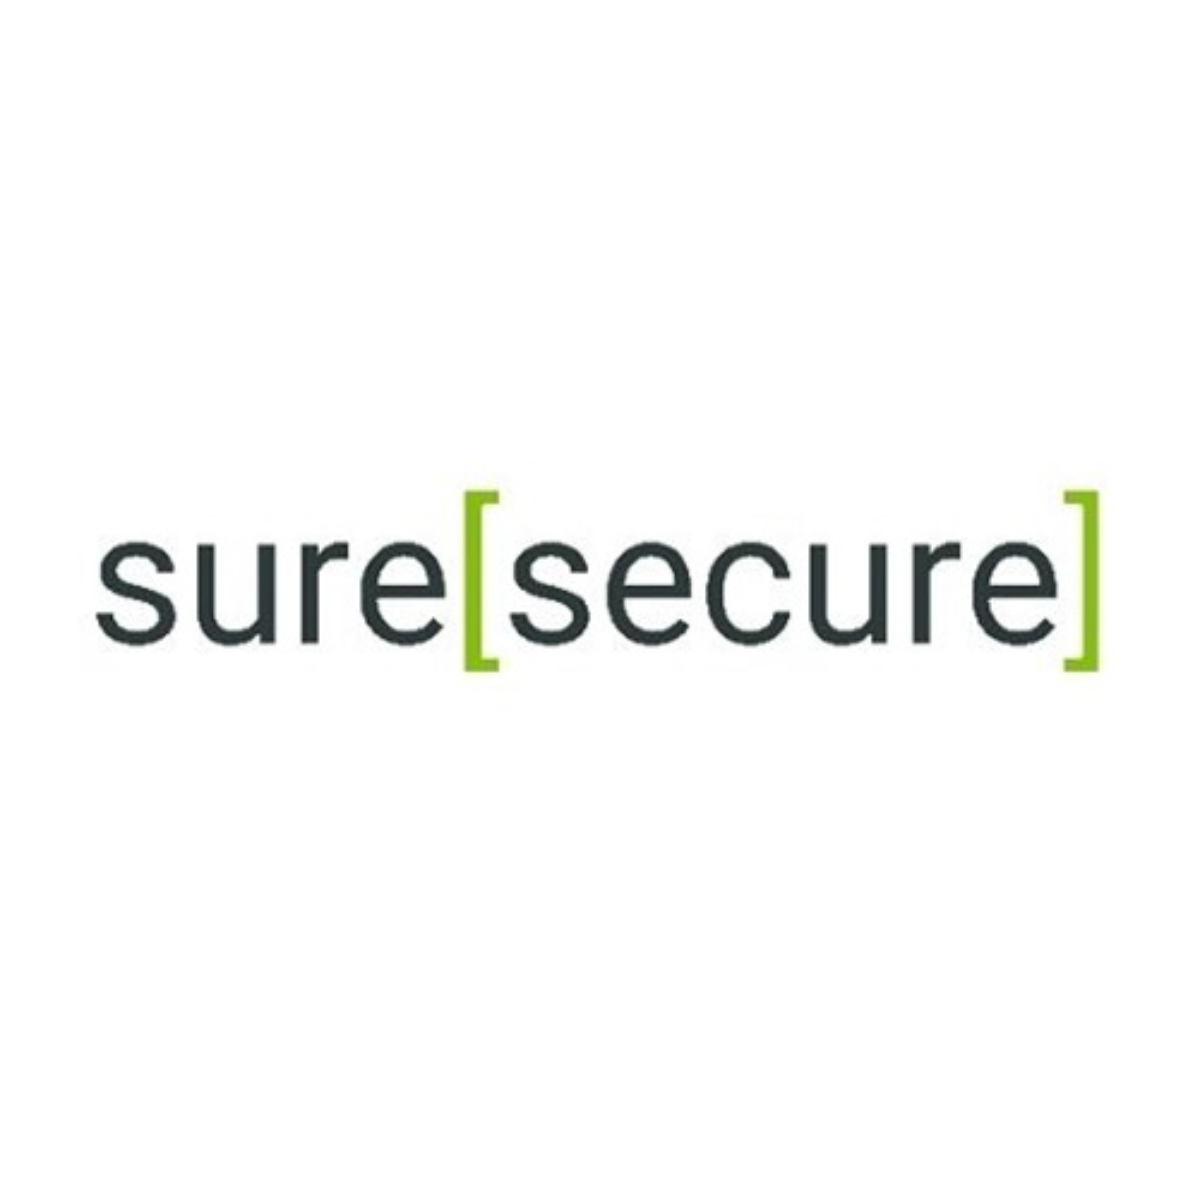 Suresecure